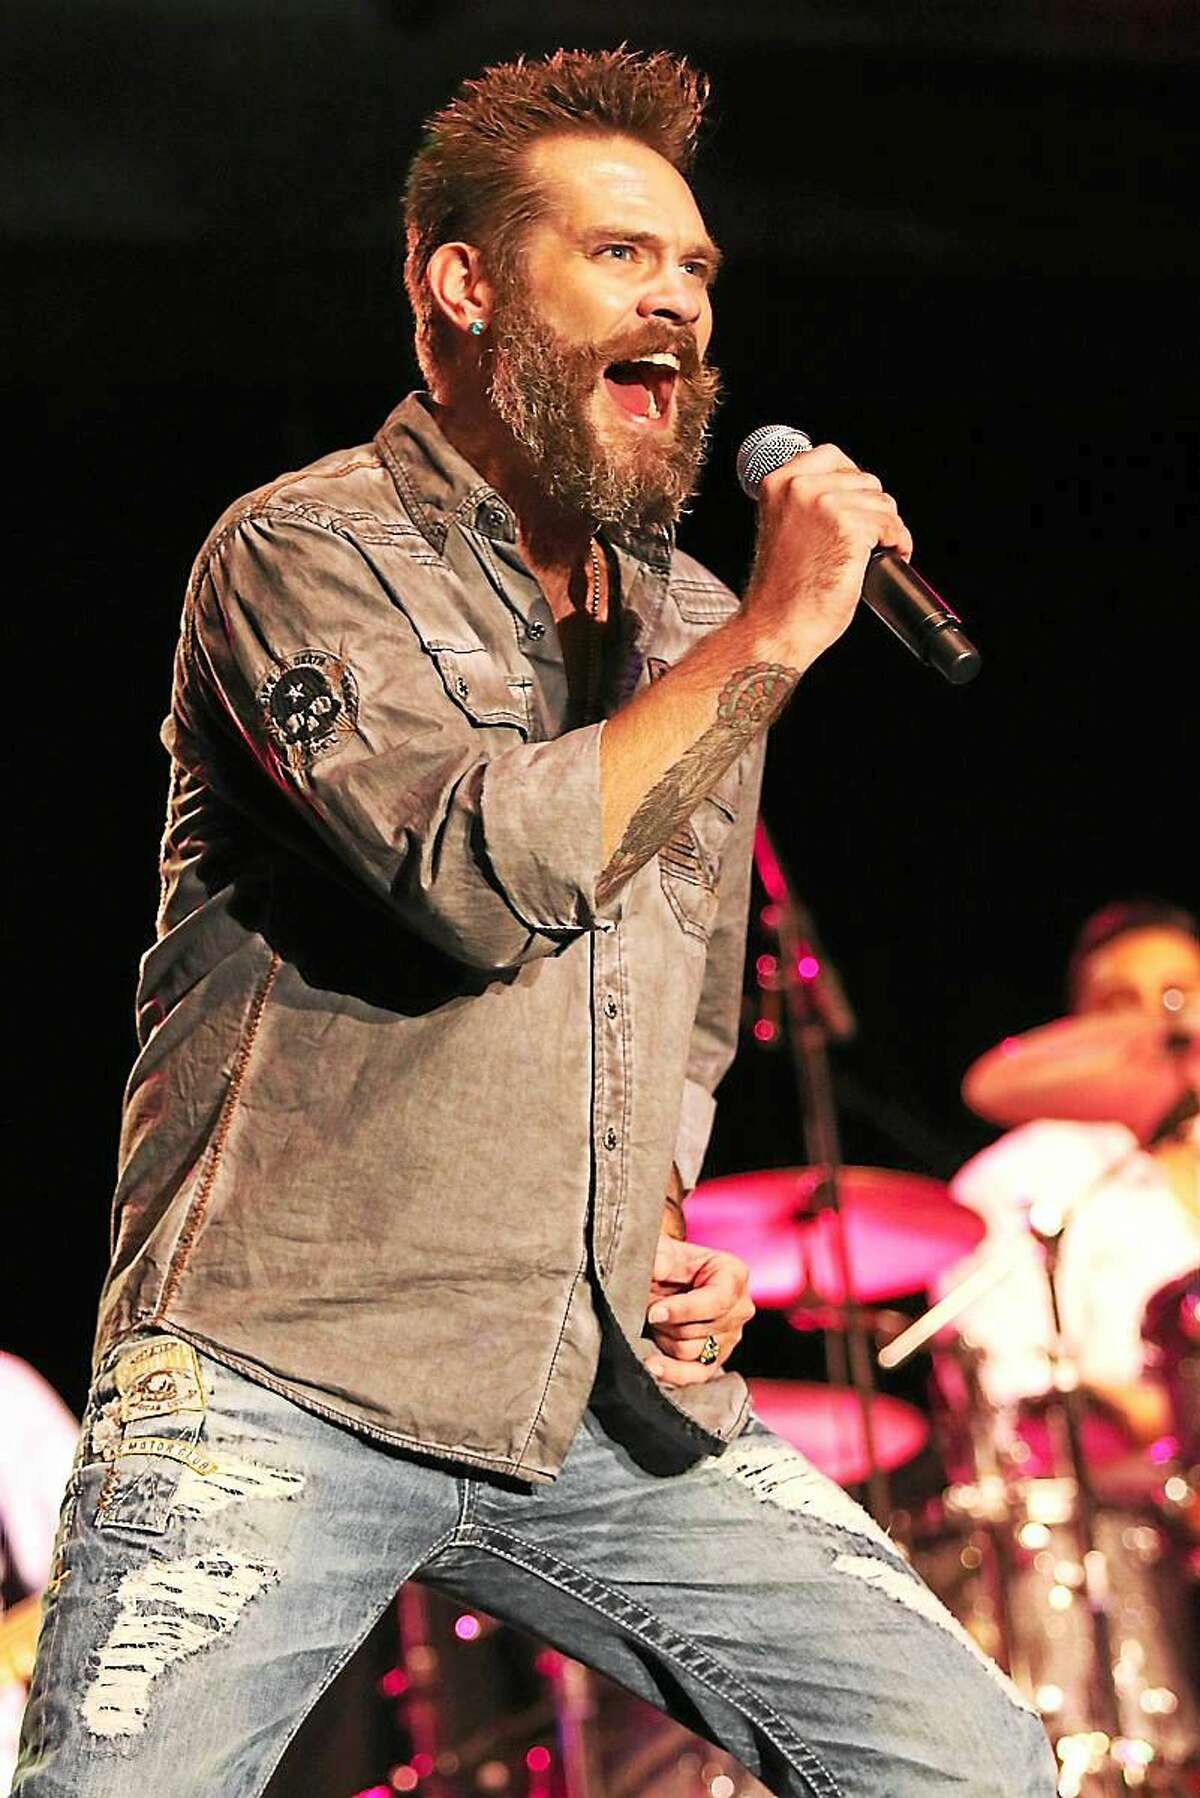 Photo by John Atashian Singer Bo Bice is shown performing on stage along with Blood, Sweat & Tears during the bandís concert at the Connecticut Convention Center in Hartford on July 24th. Also included in the double bill show was Jefferson Starship.